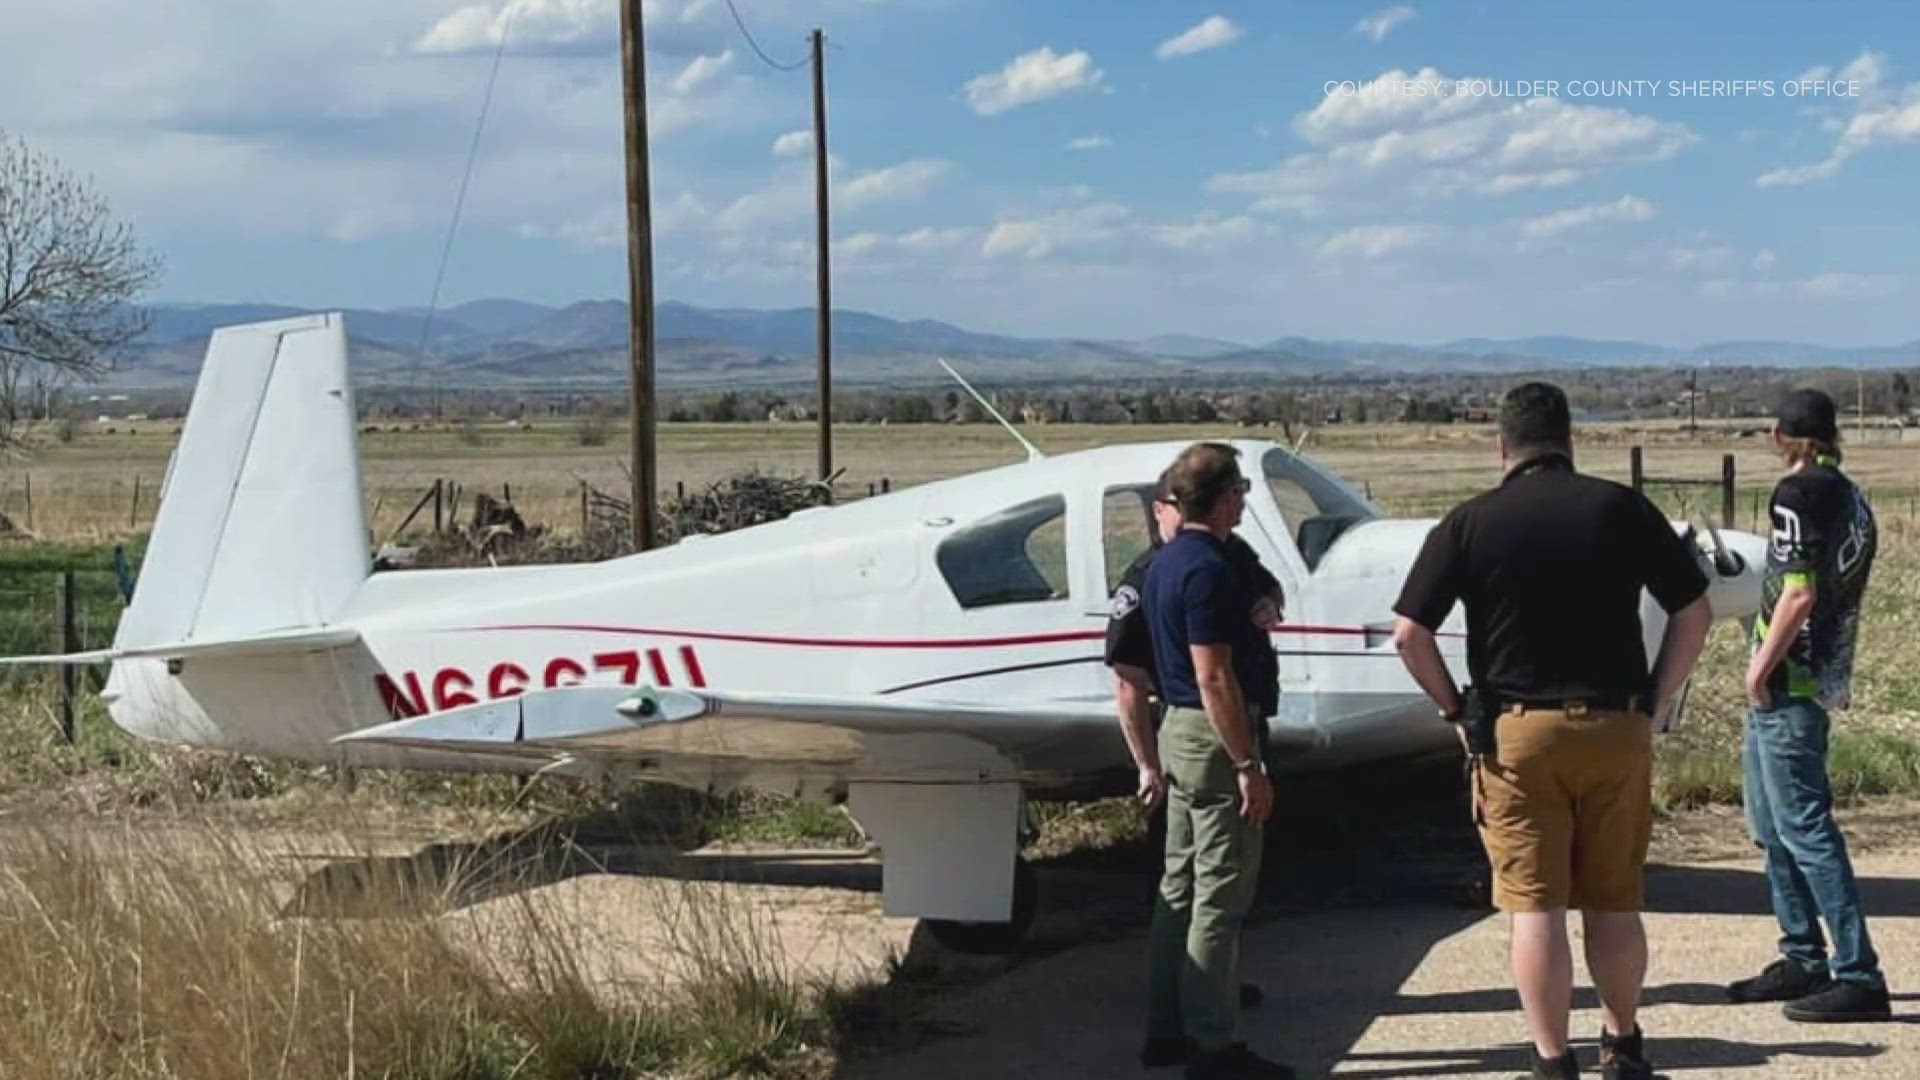 The pilot was on his way from Cheyenne, Wyoming to Rocky Mountain Metropolitan Airport when the plane experienced mechanical issues, the sheriff's office said.